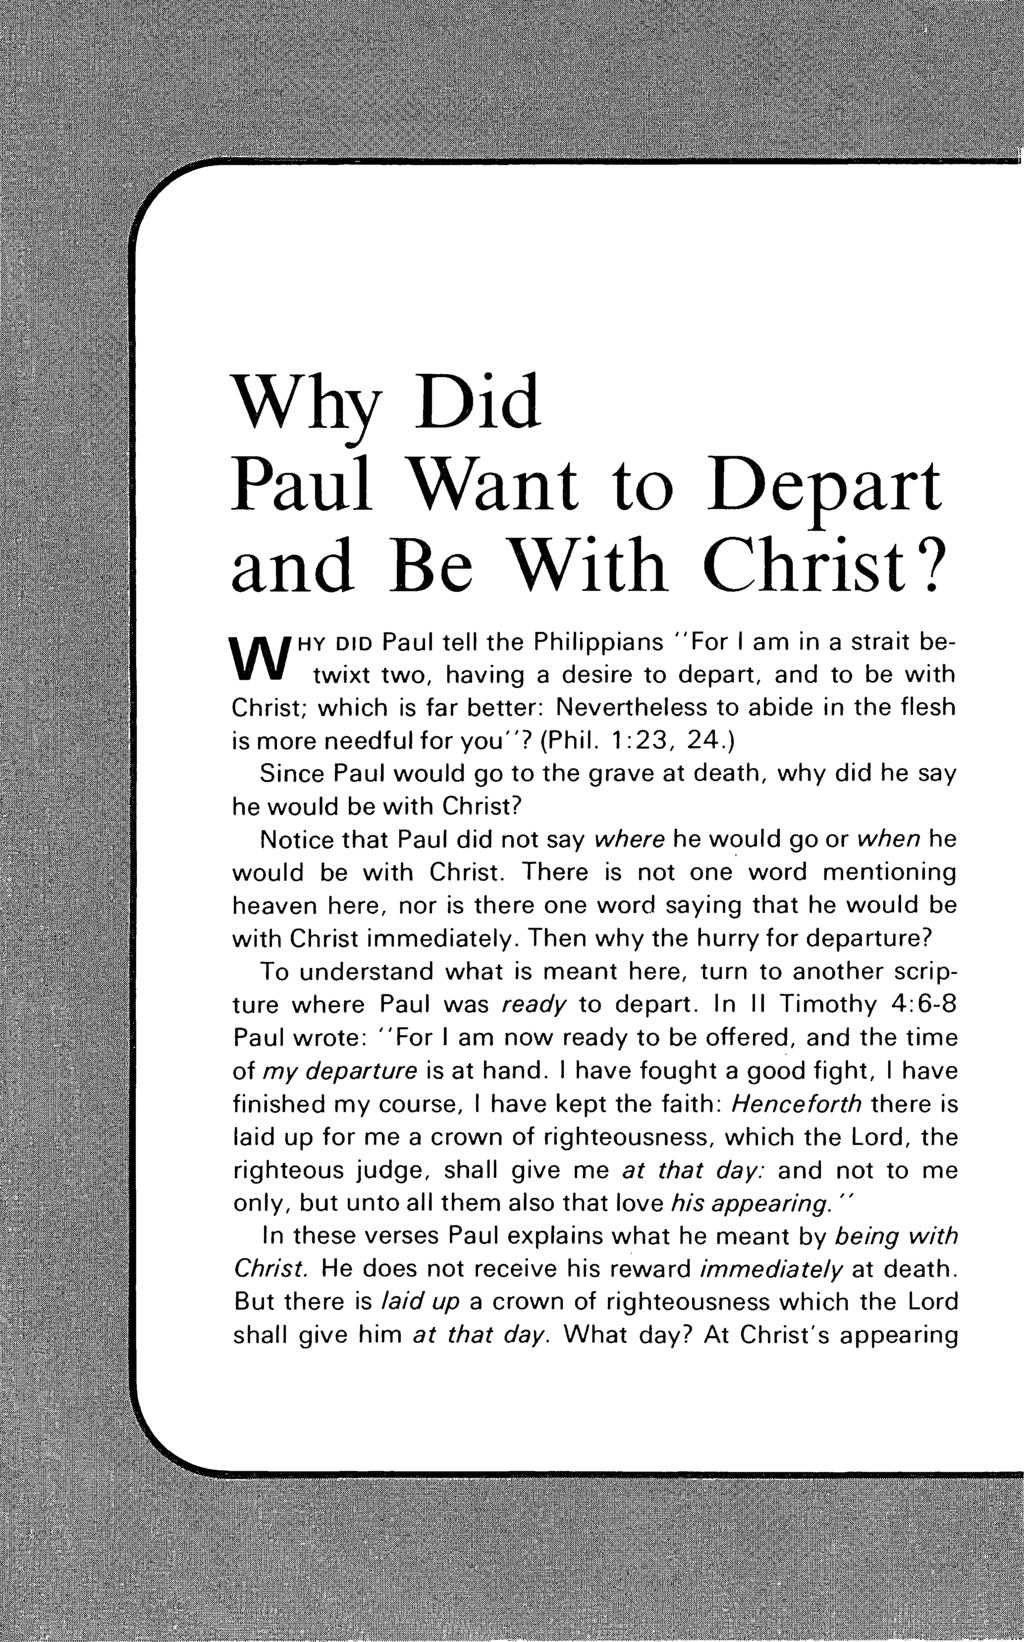 Why Did Paul Want to Depart and Be With Christ?